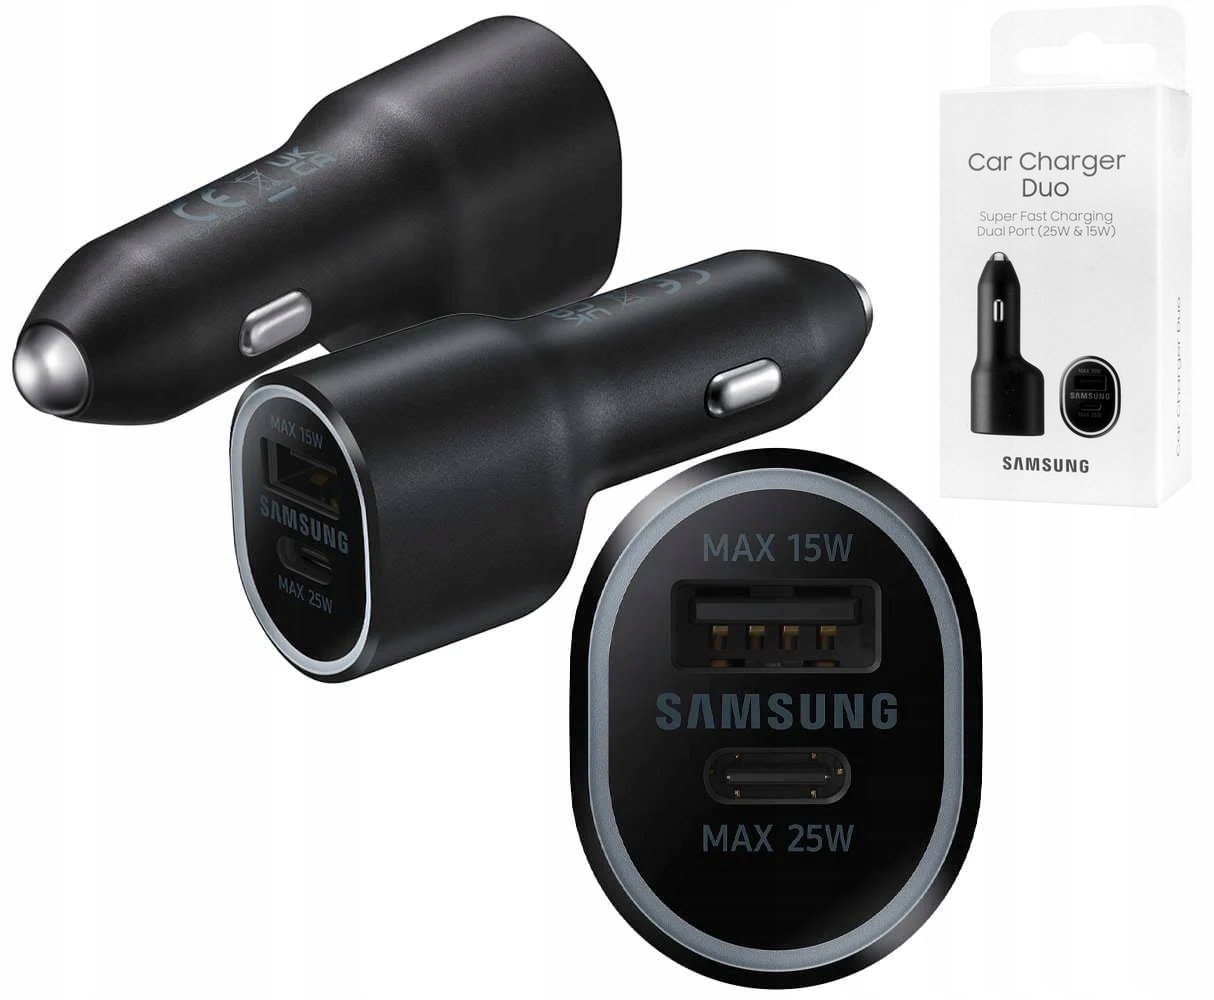 Samsung Car Charger Duo (25W & 15W)